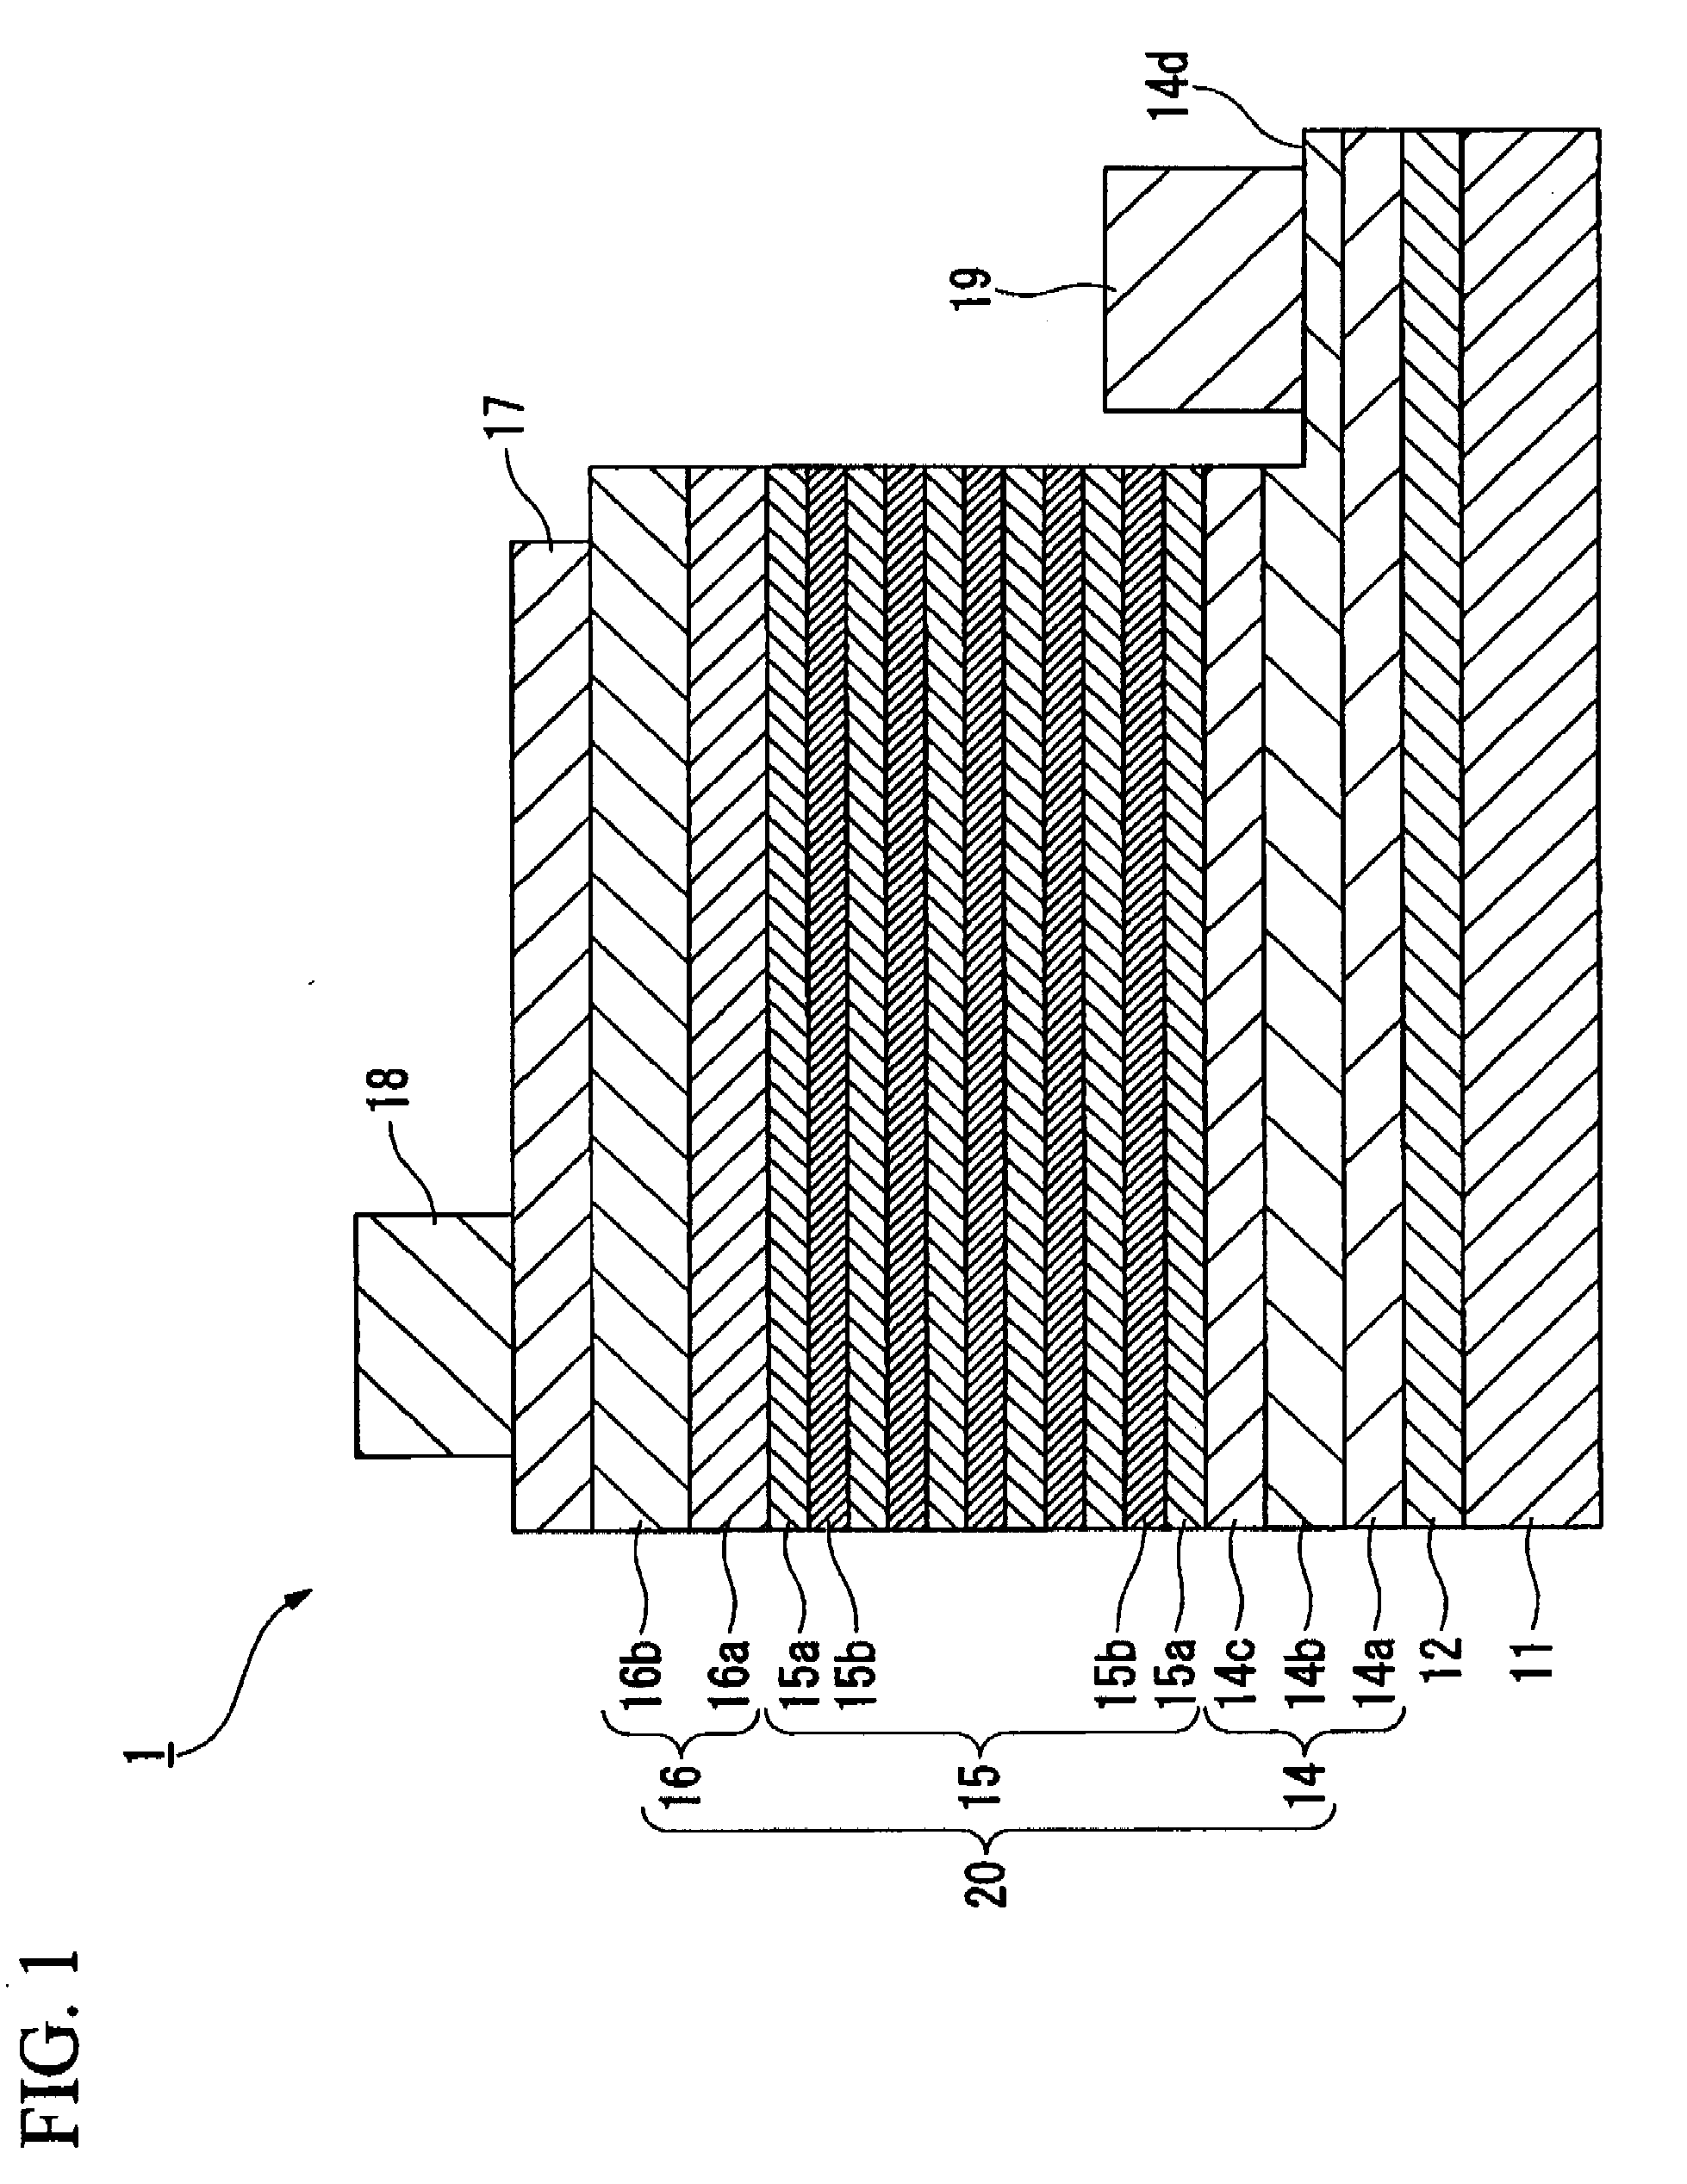 Apparatus for manufacturing group iii nitride compound semiconductor light-emitting device, method of manufacturing group iii nitride compound semiconductor light-emitting device, group iii nitride compound semiconductor light-emitting device, and lamp